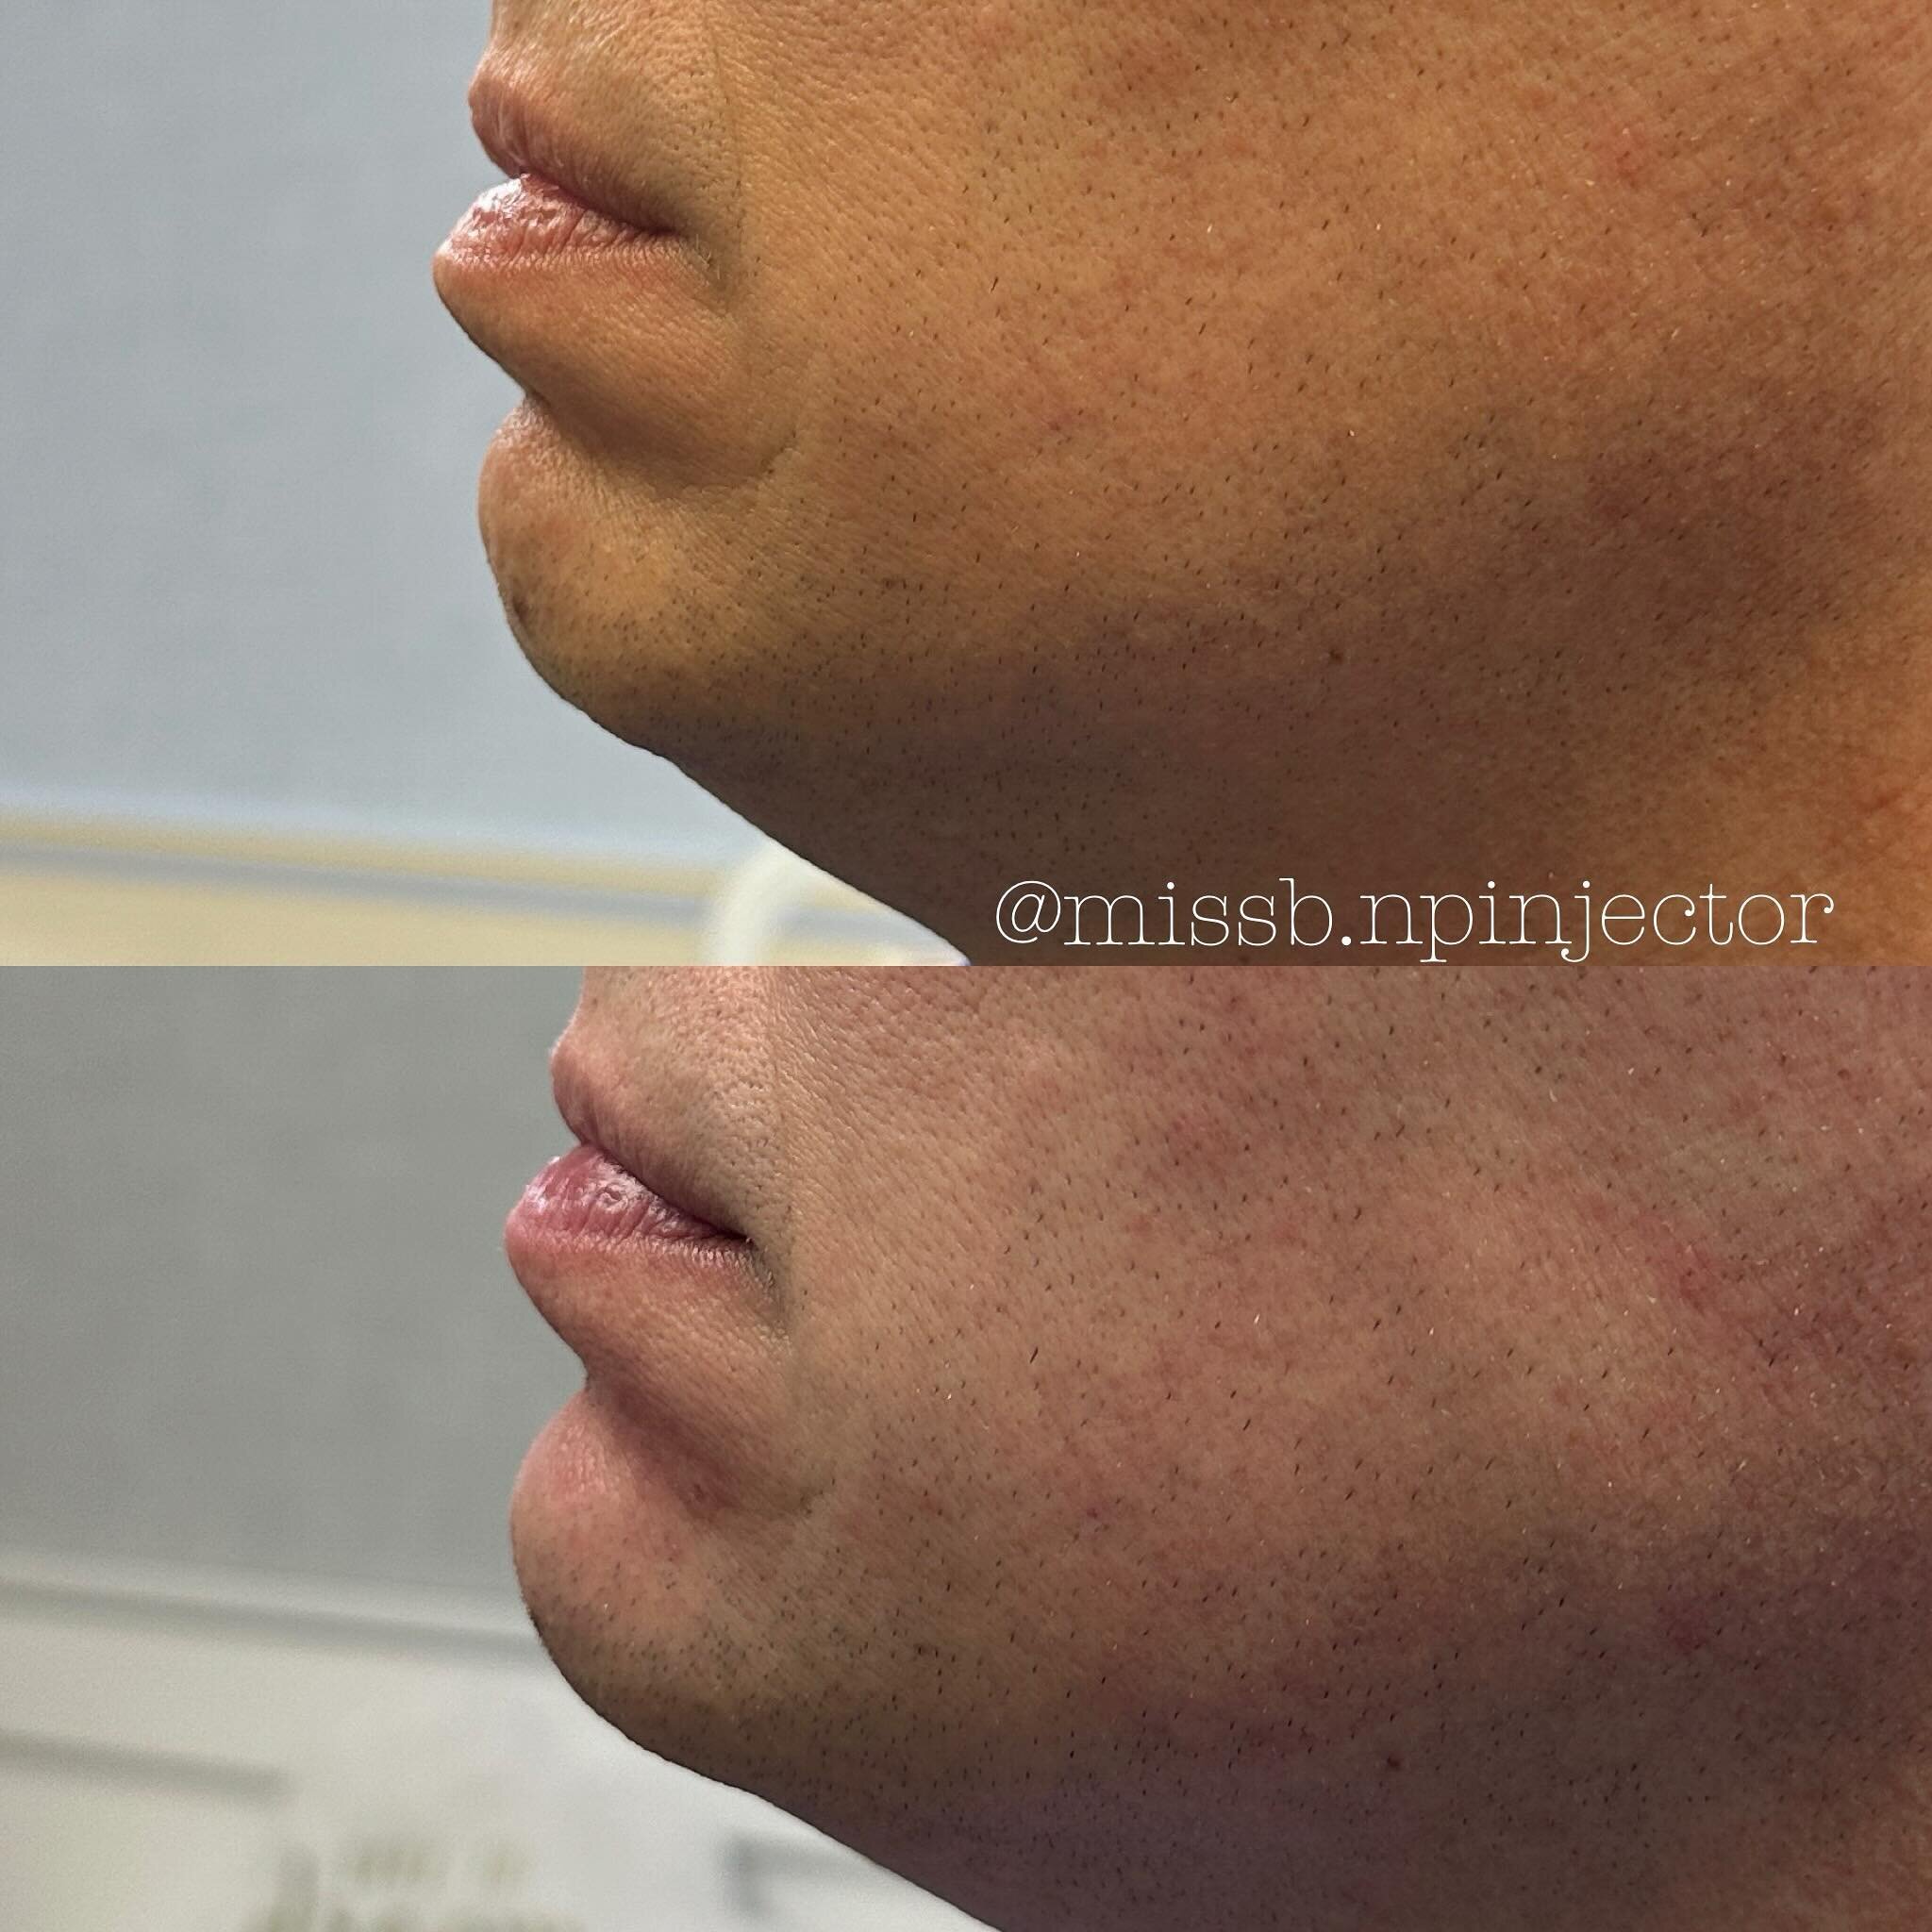 Correction of a weak chin to provide anterior projection is a simple treatment that can have a big impact. 

Selection of the proper product for this area is key. I used Restylane Shaype for the first time on this client and I was impressed with the 